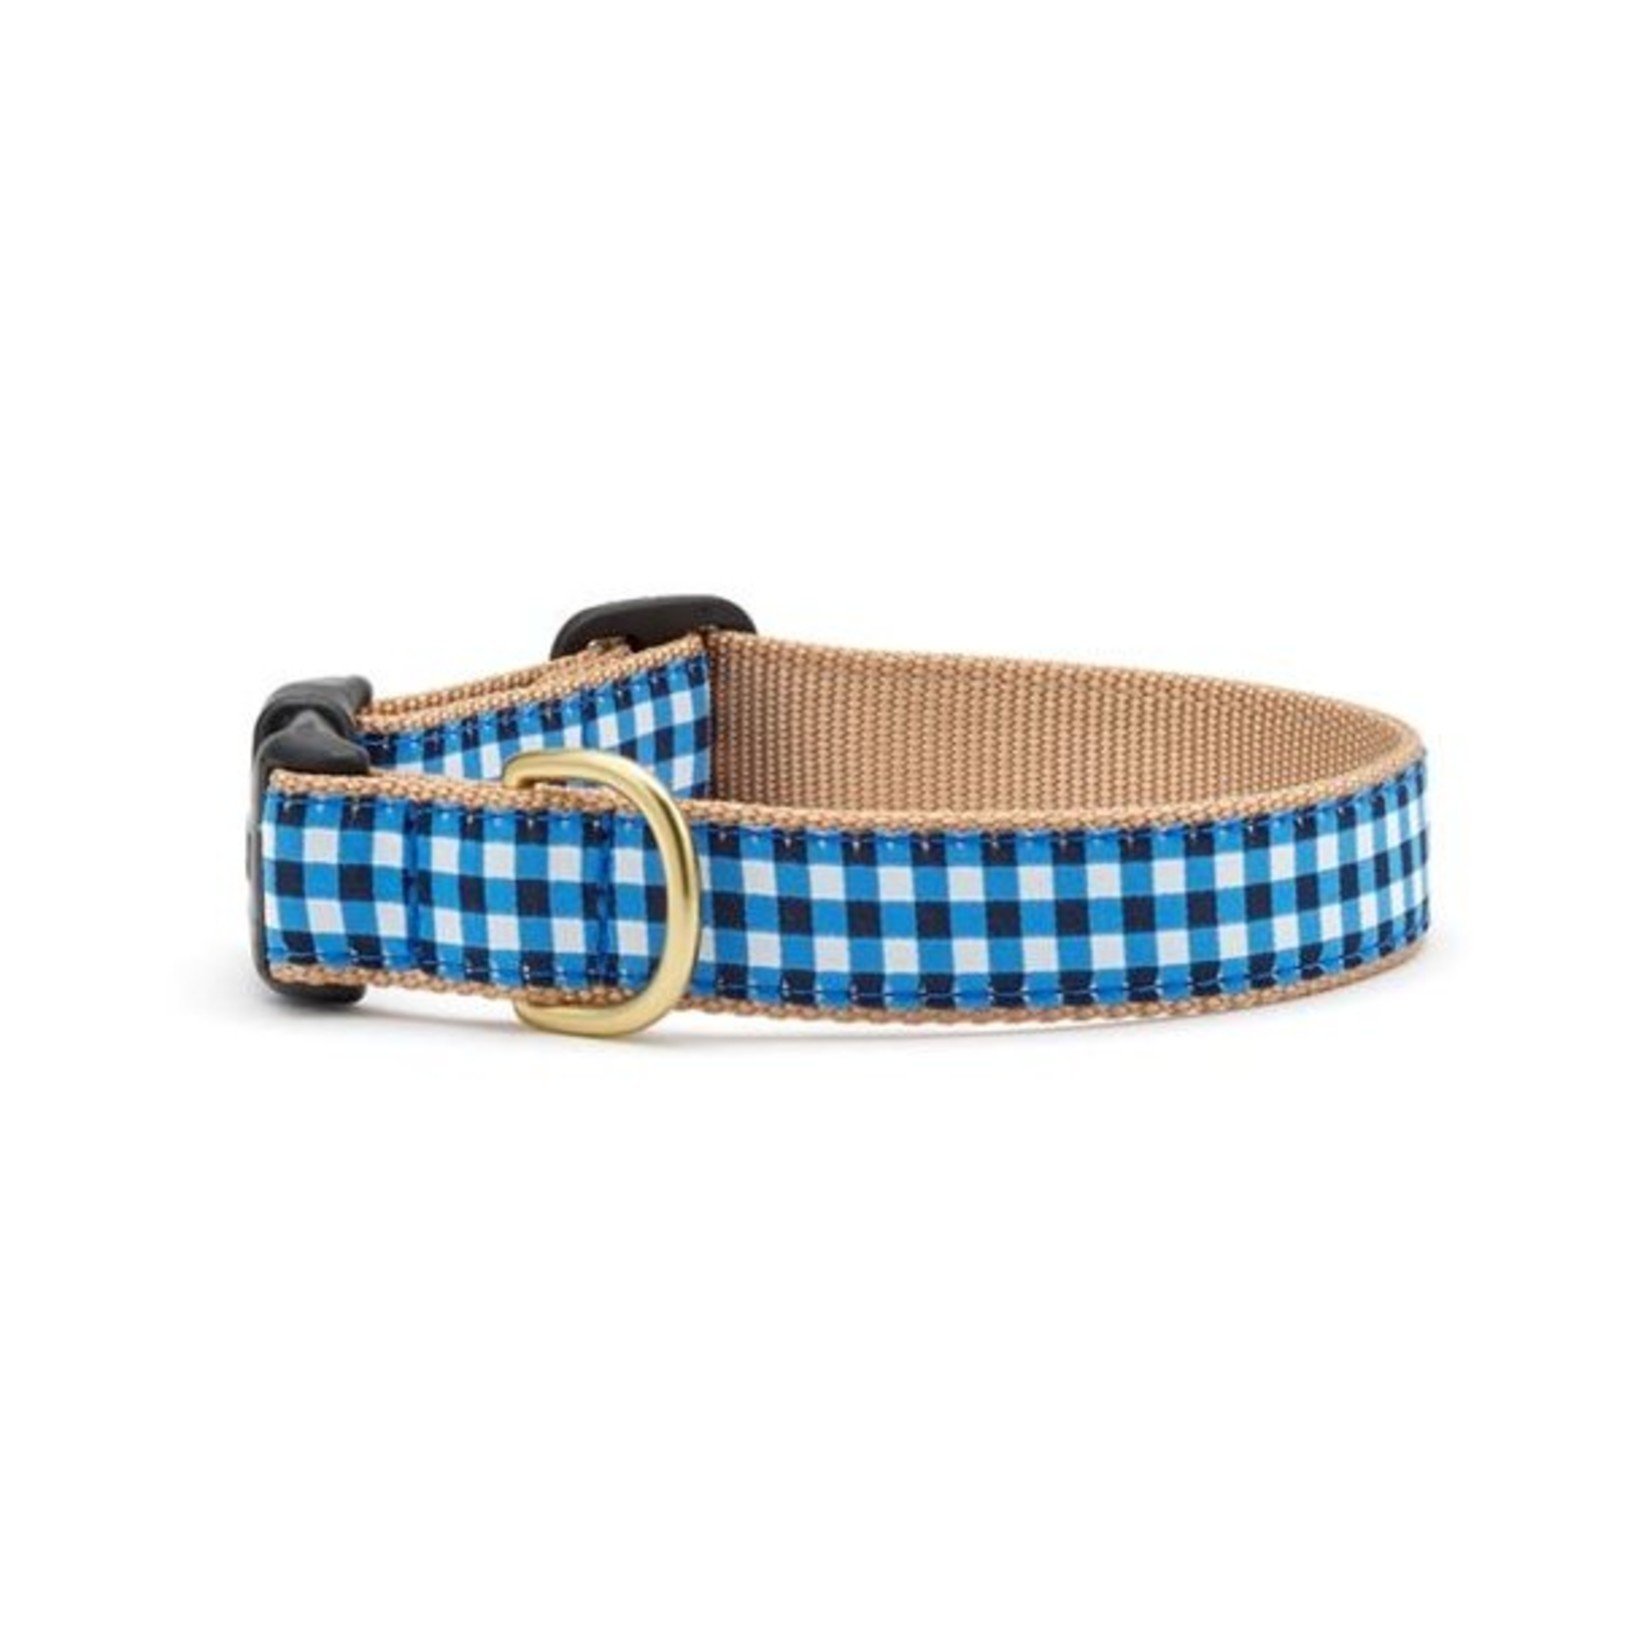 Up Country UPCOUNTRY Navy Gingham Dog Collar